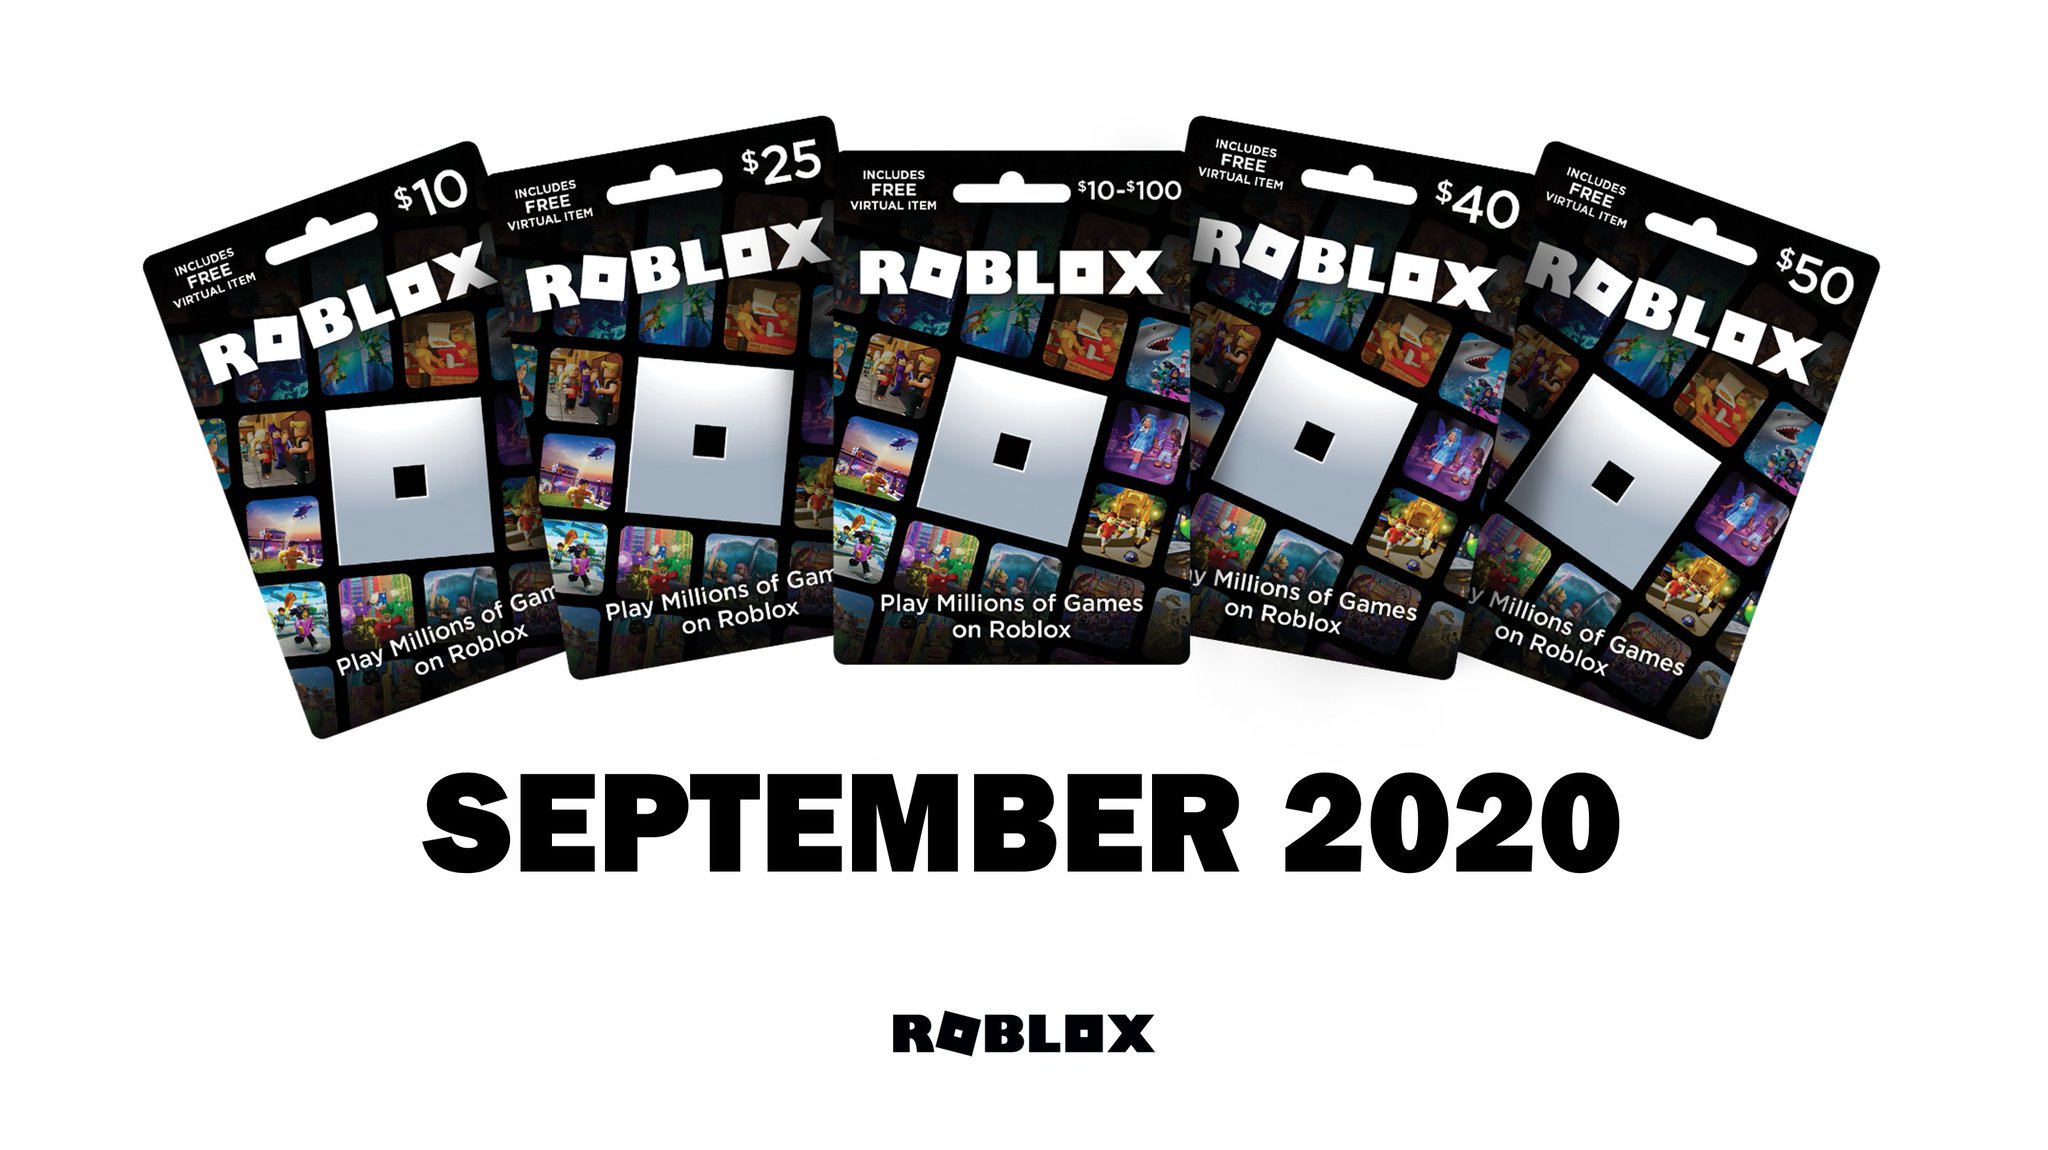 Bloxy News On Twitter The Roblox Gift Card Virtual Items And Their Corresponding Stores For September 2020 Are Now Available To View At Https T Co Msd6zgpbet Https T Co 0spzk0b84r - w roblox